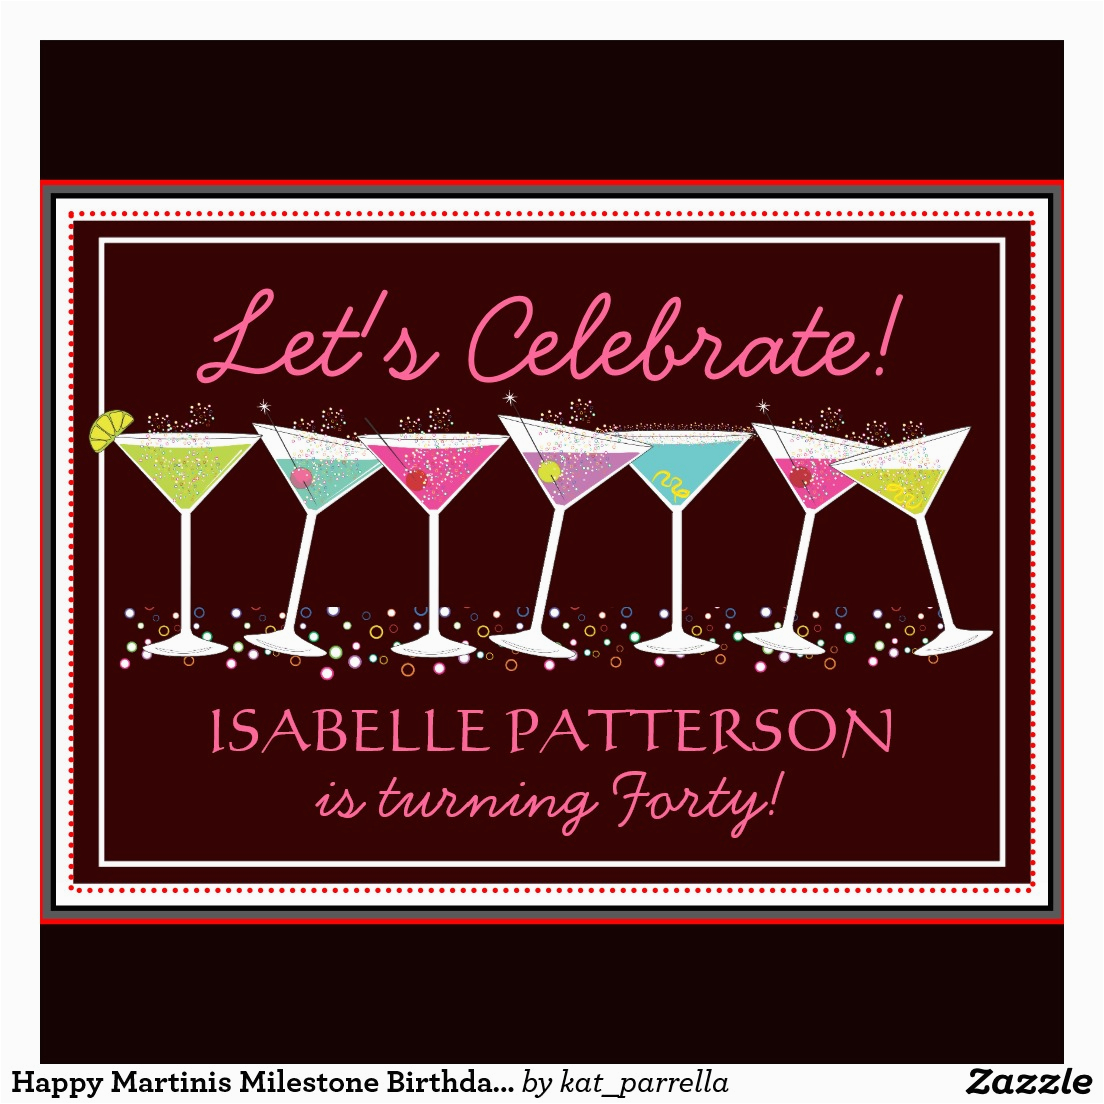 free example adult birthday party invitations